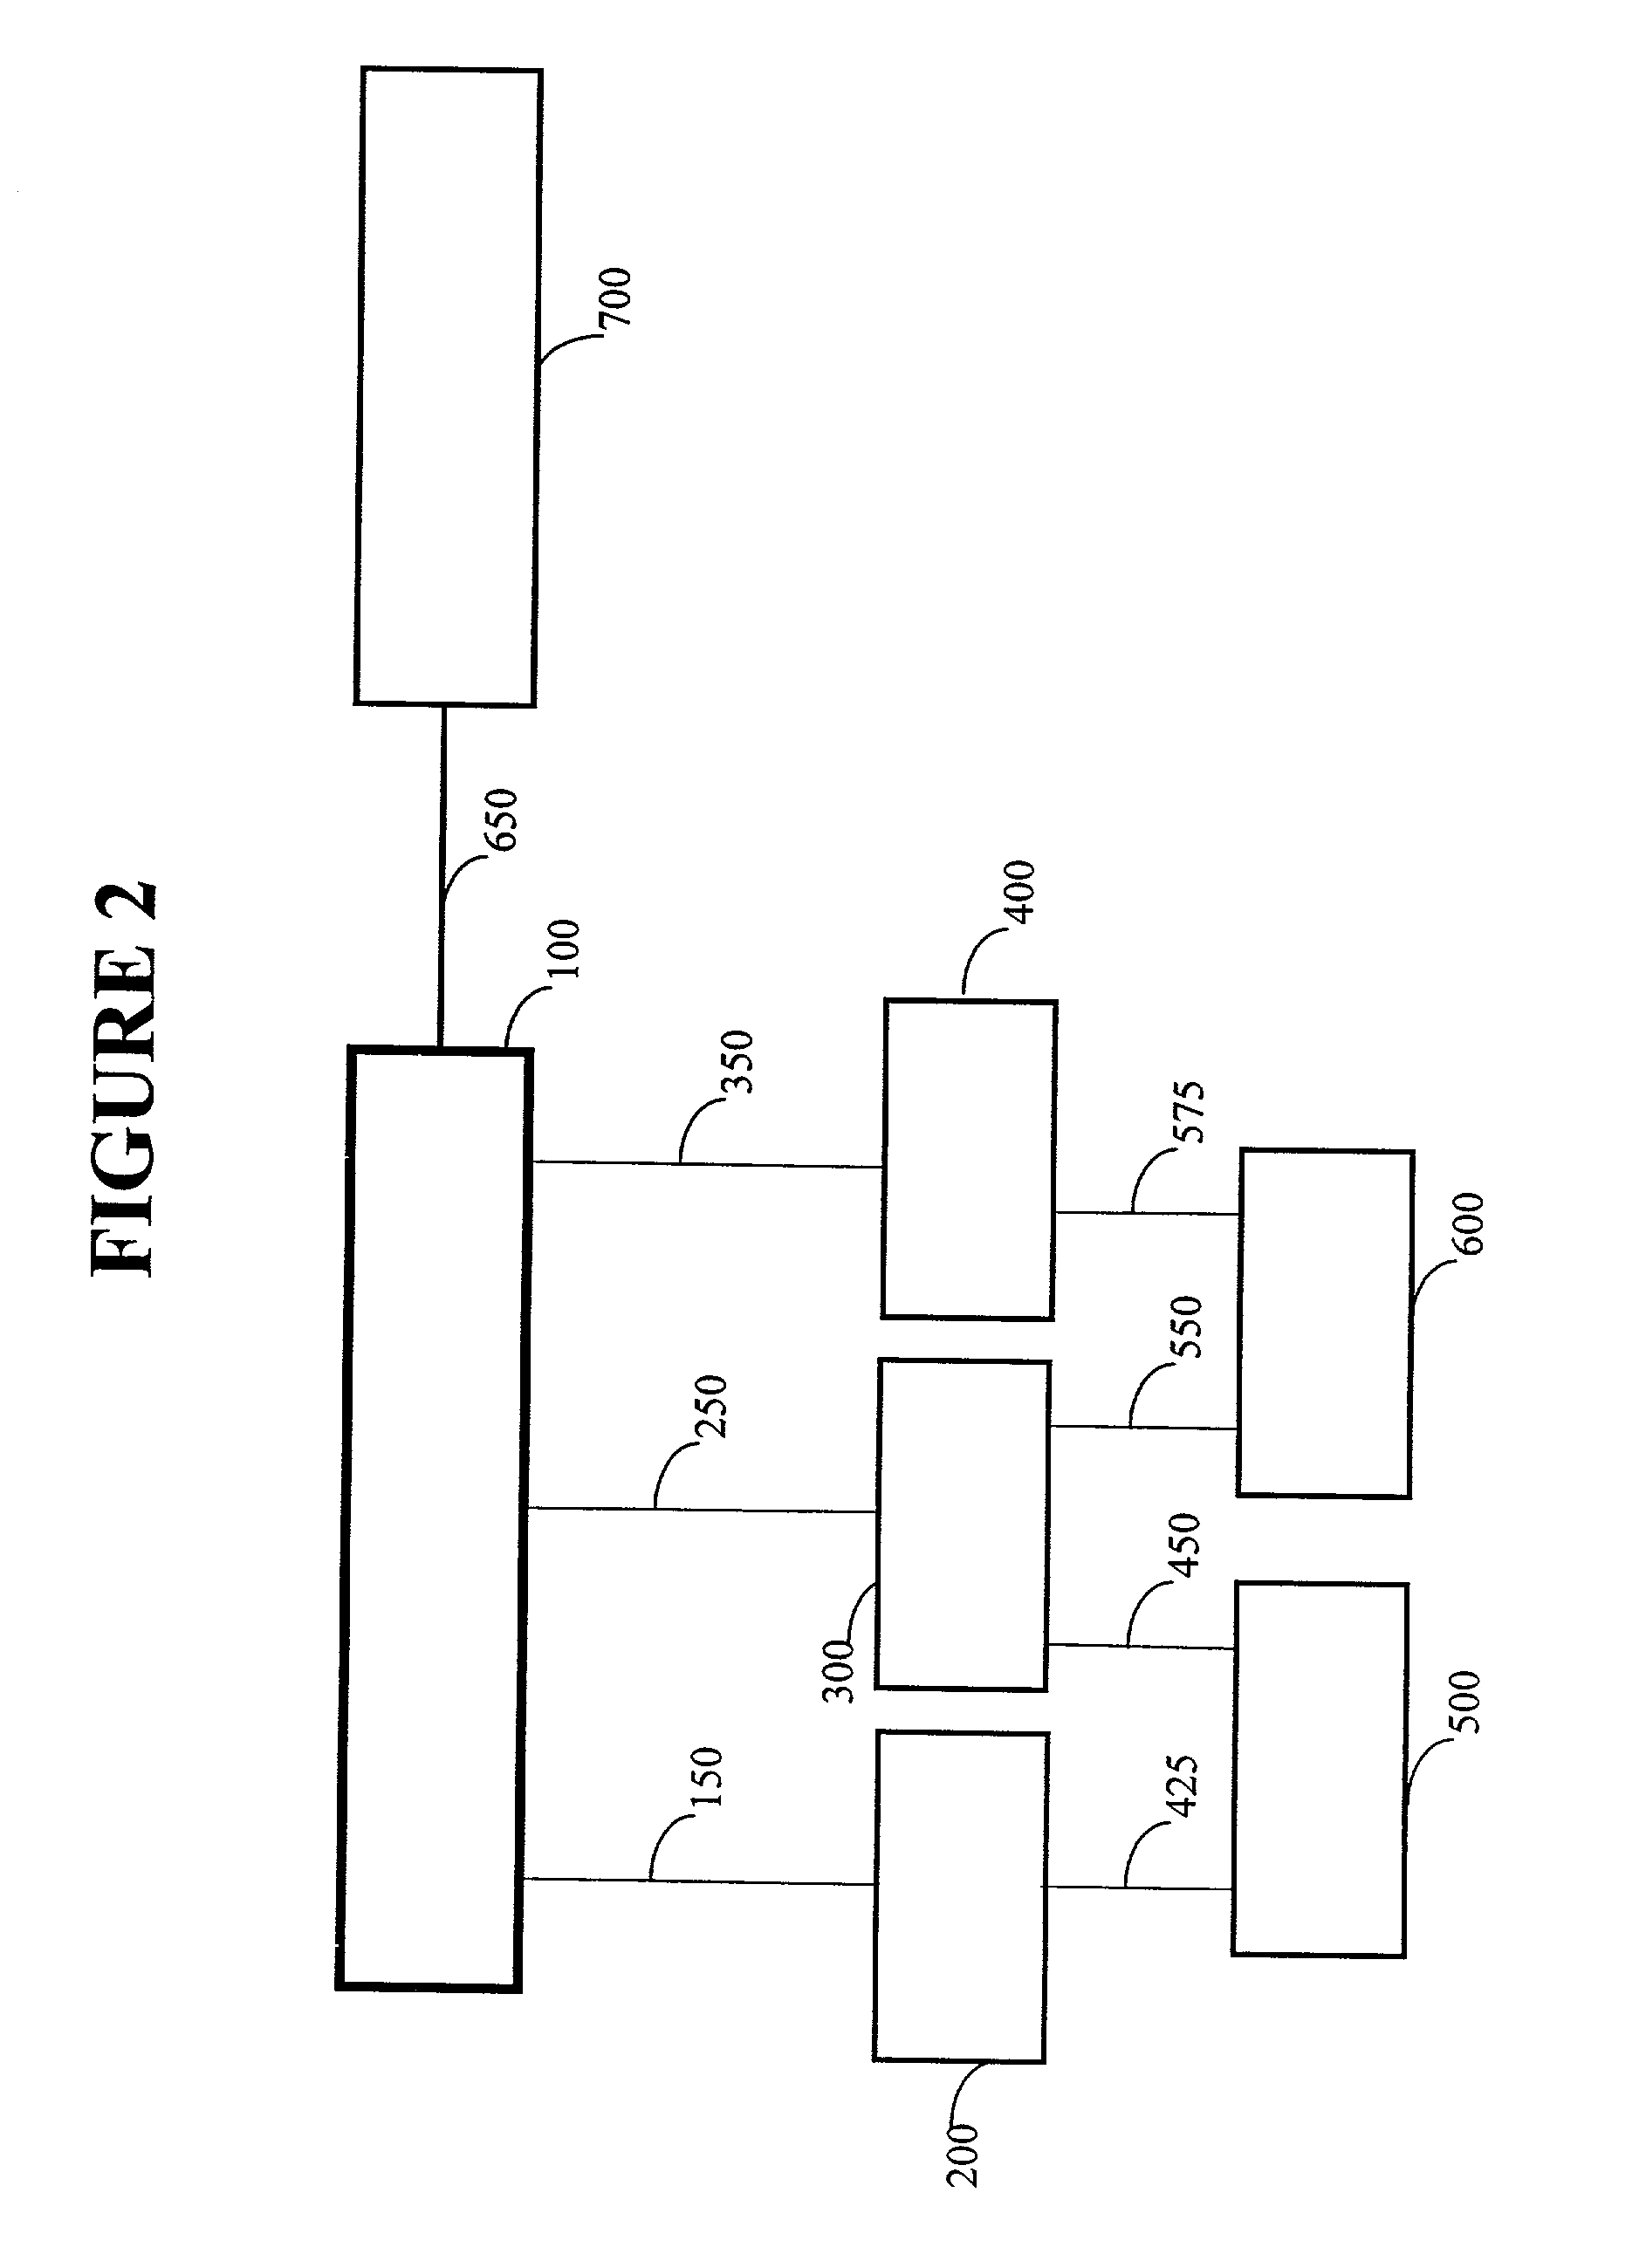 System, method and software for creating or maintaining distributed transparent persistence of complex data objects and their data relationships